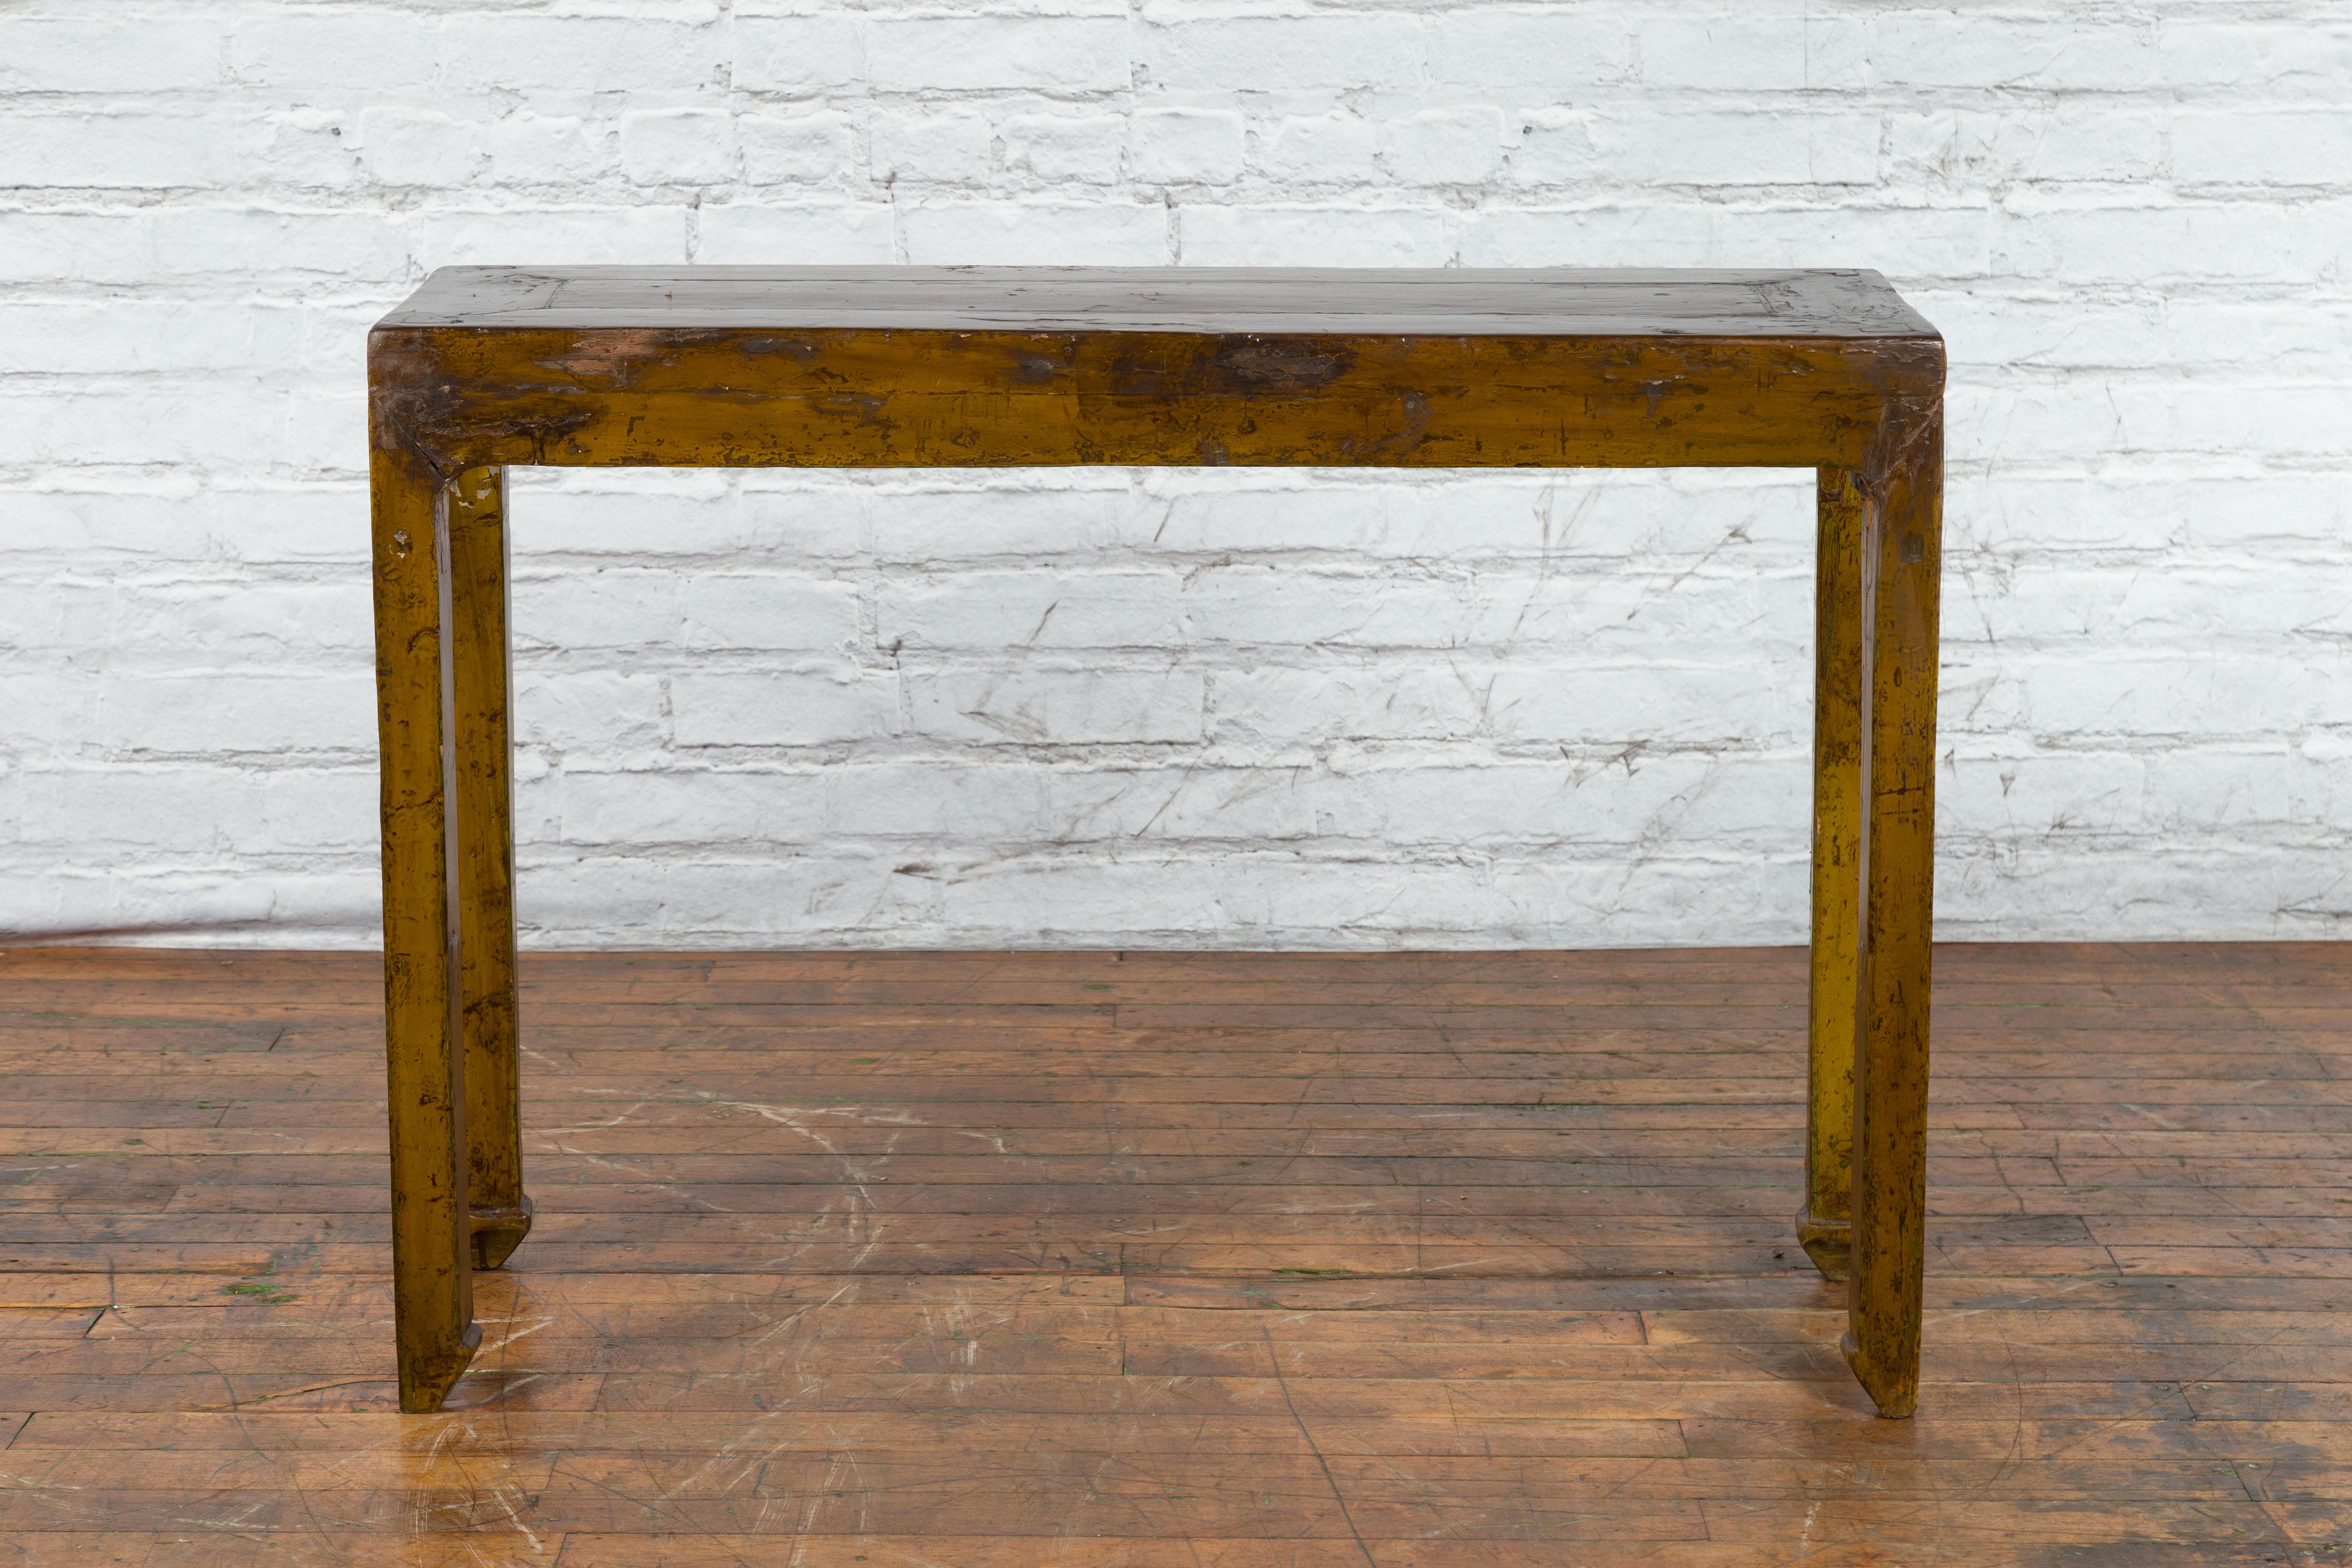 A Chinese Qing Dynasty period brown lacquer altar console table from the 19th century with original distressed patina and horse hoof legs. Created in China during the Qing Dynasty period in the 19th century, this altar console table features a